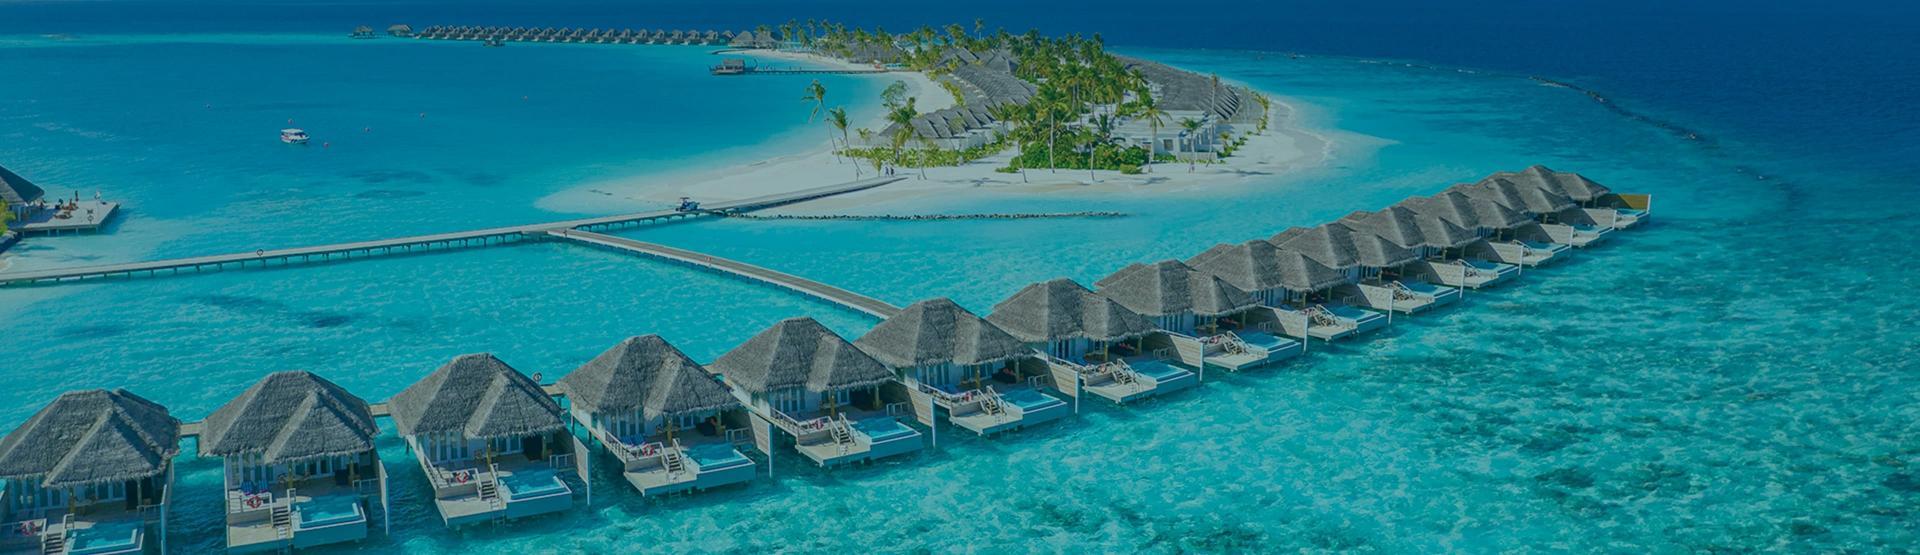 Find the Best Hotels in Maldives